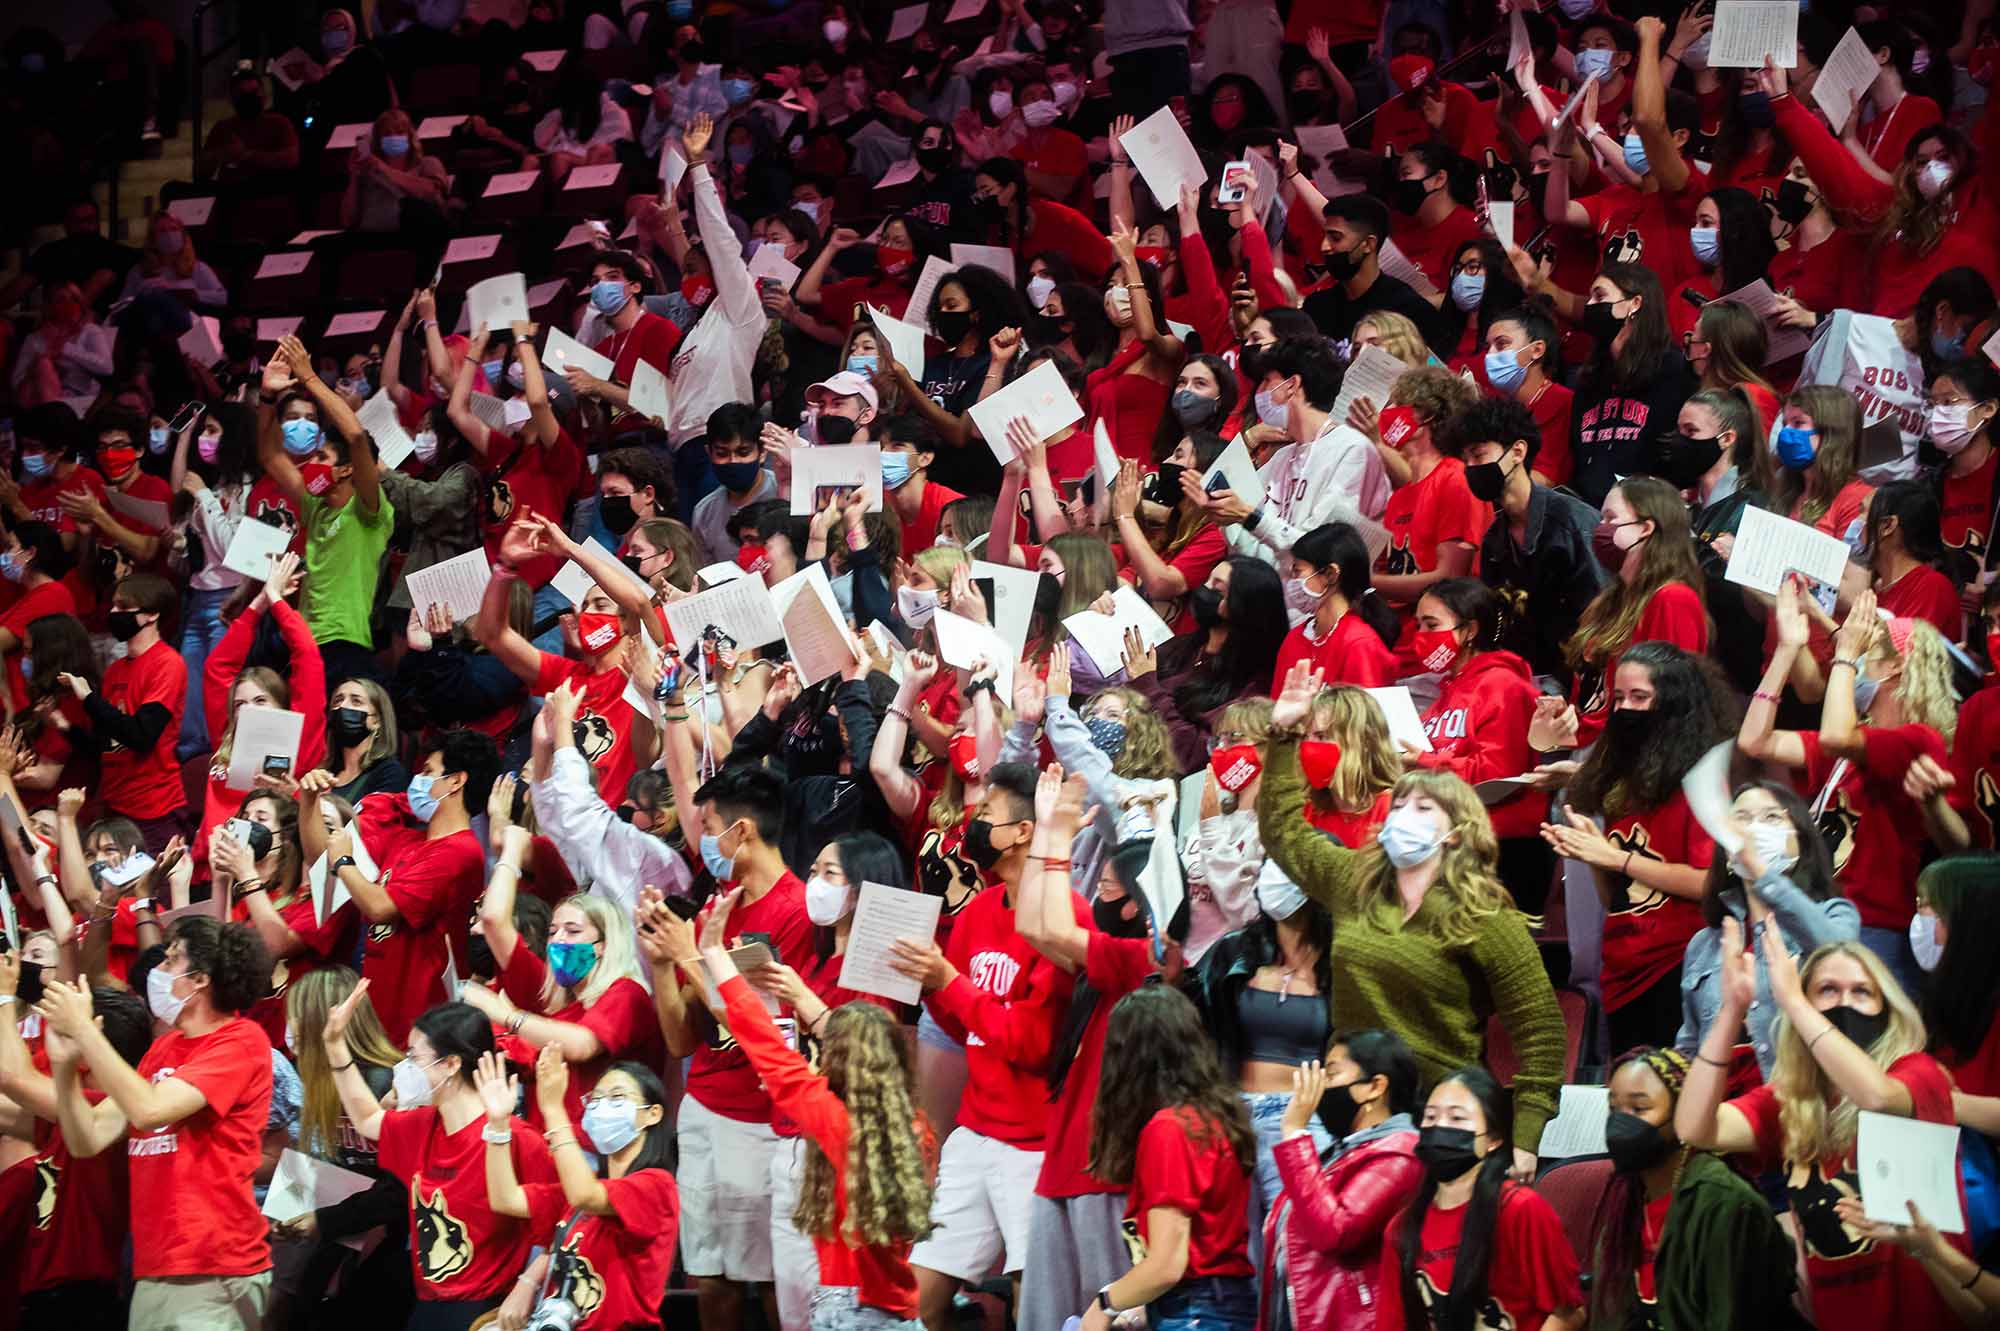 Members of the Boston University Class of 2025 react during the Matriculation ceremony at Agganis Arena.